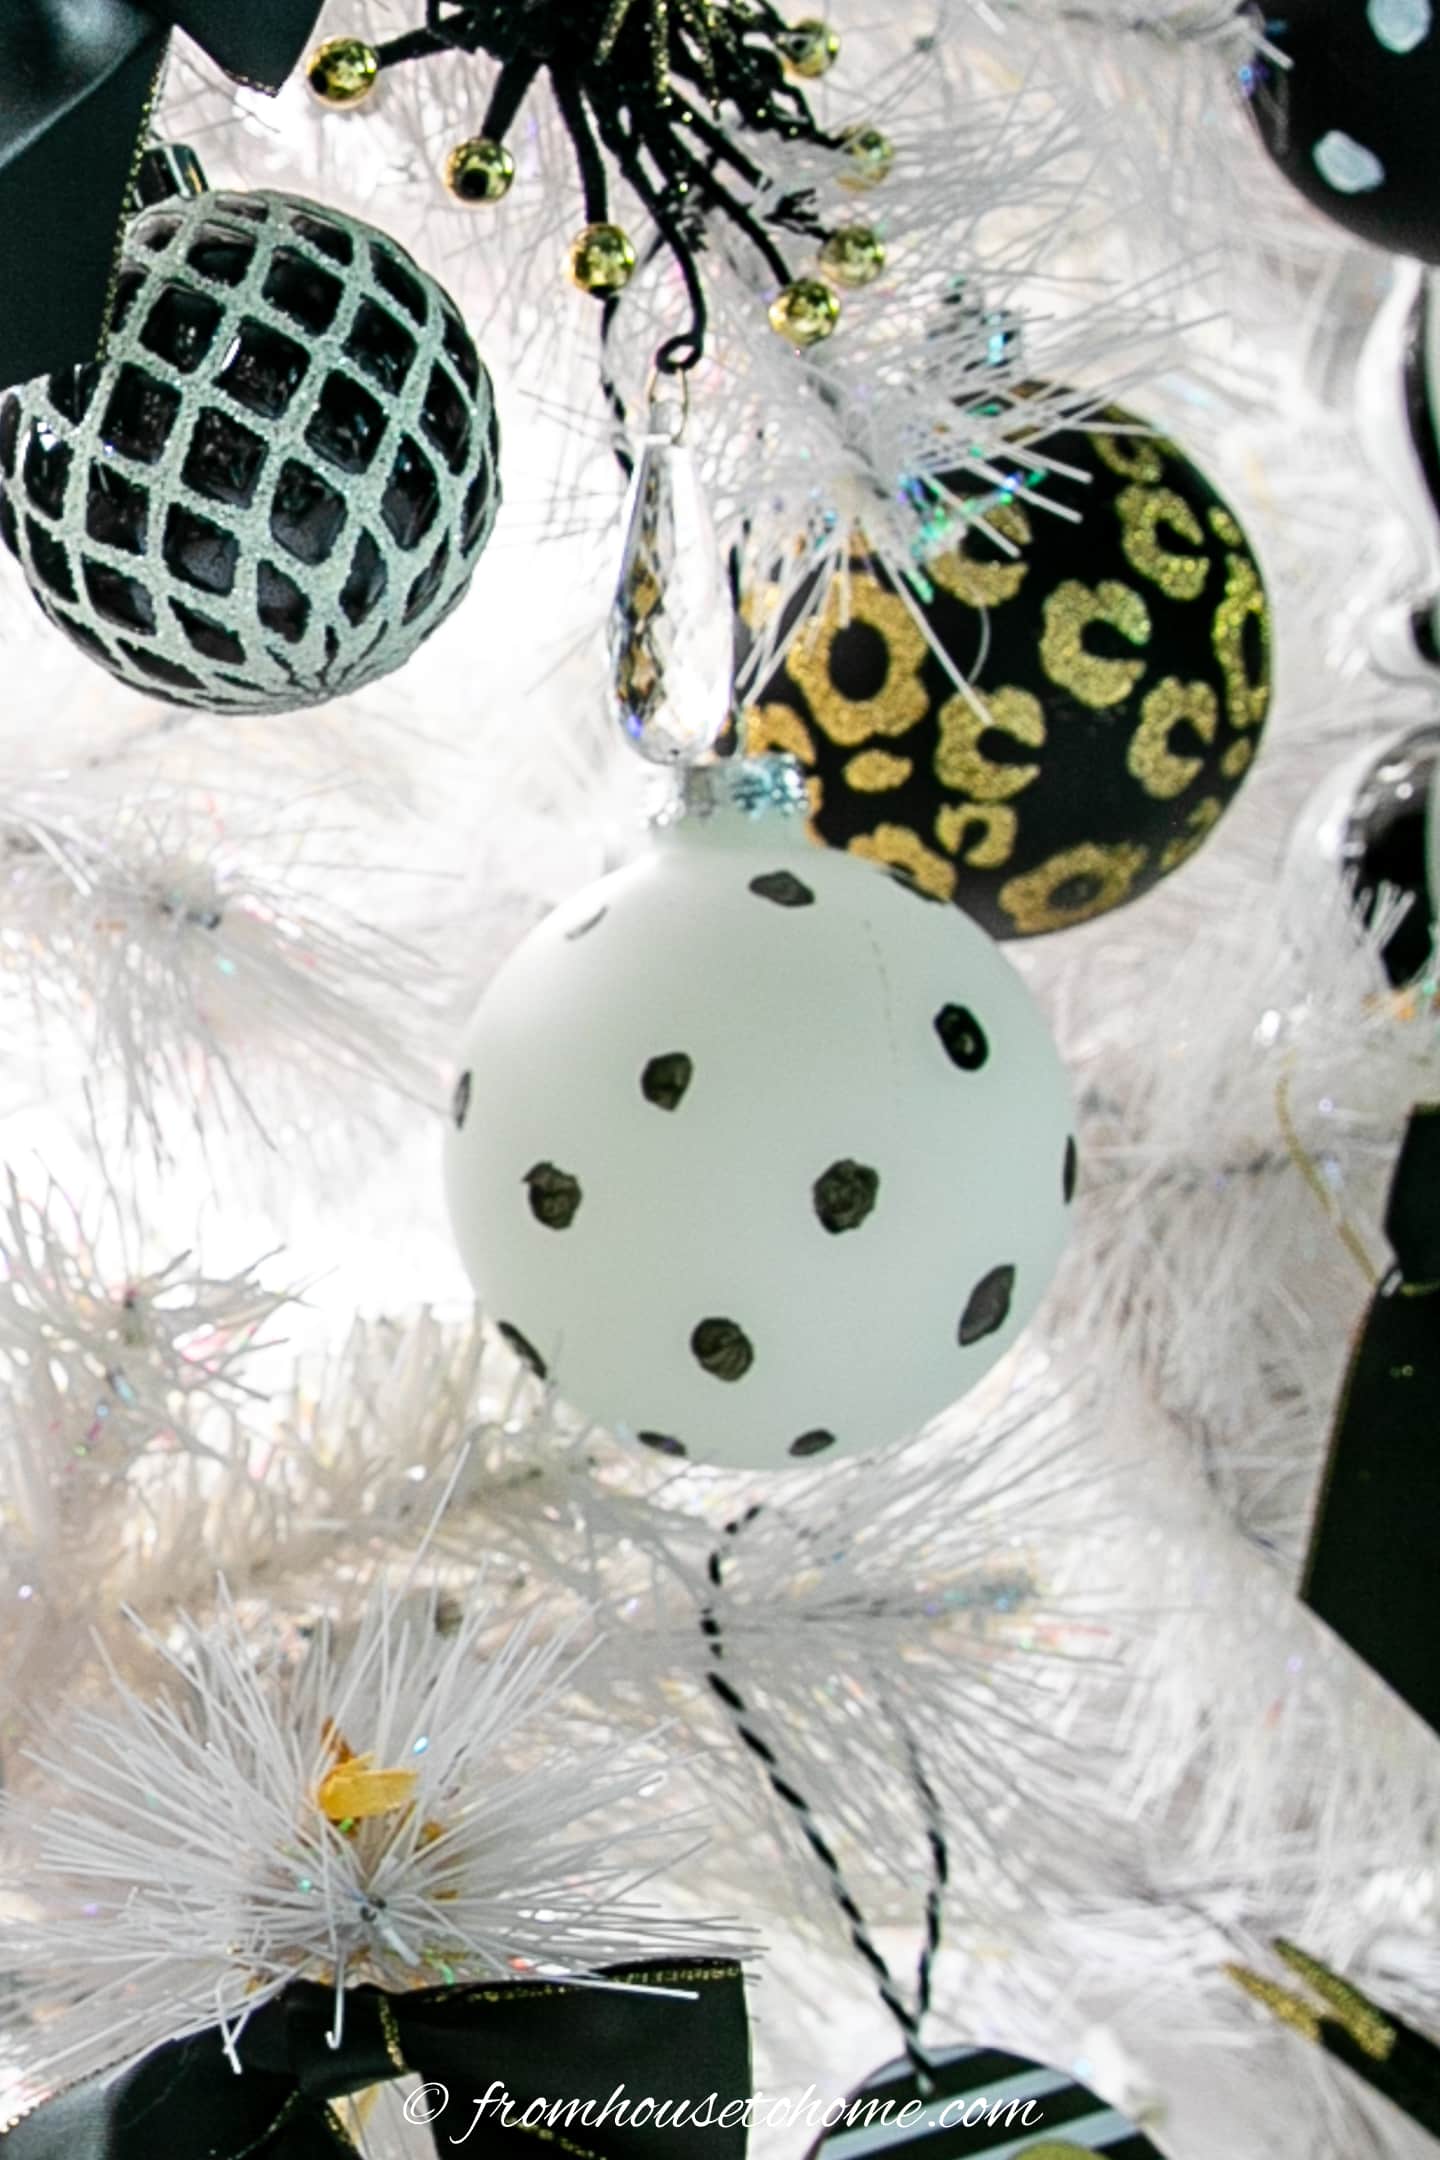 A white Christmas tree decorated with black and white polka dot ornaments.